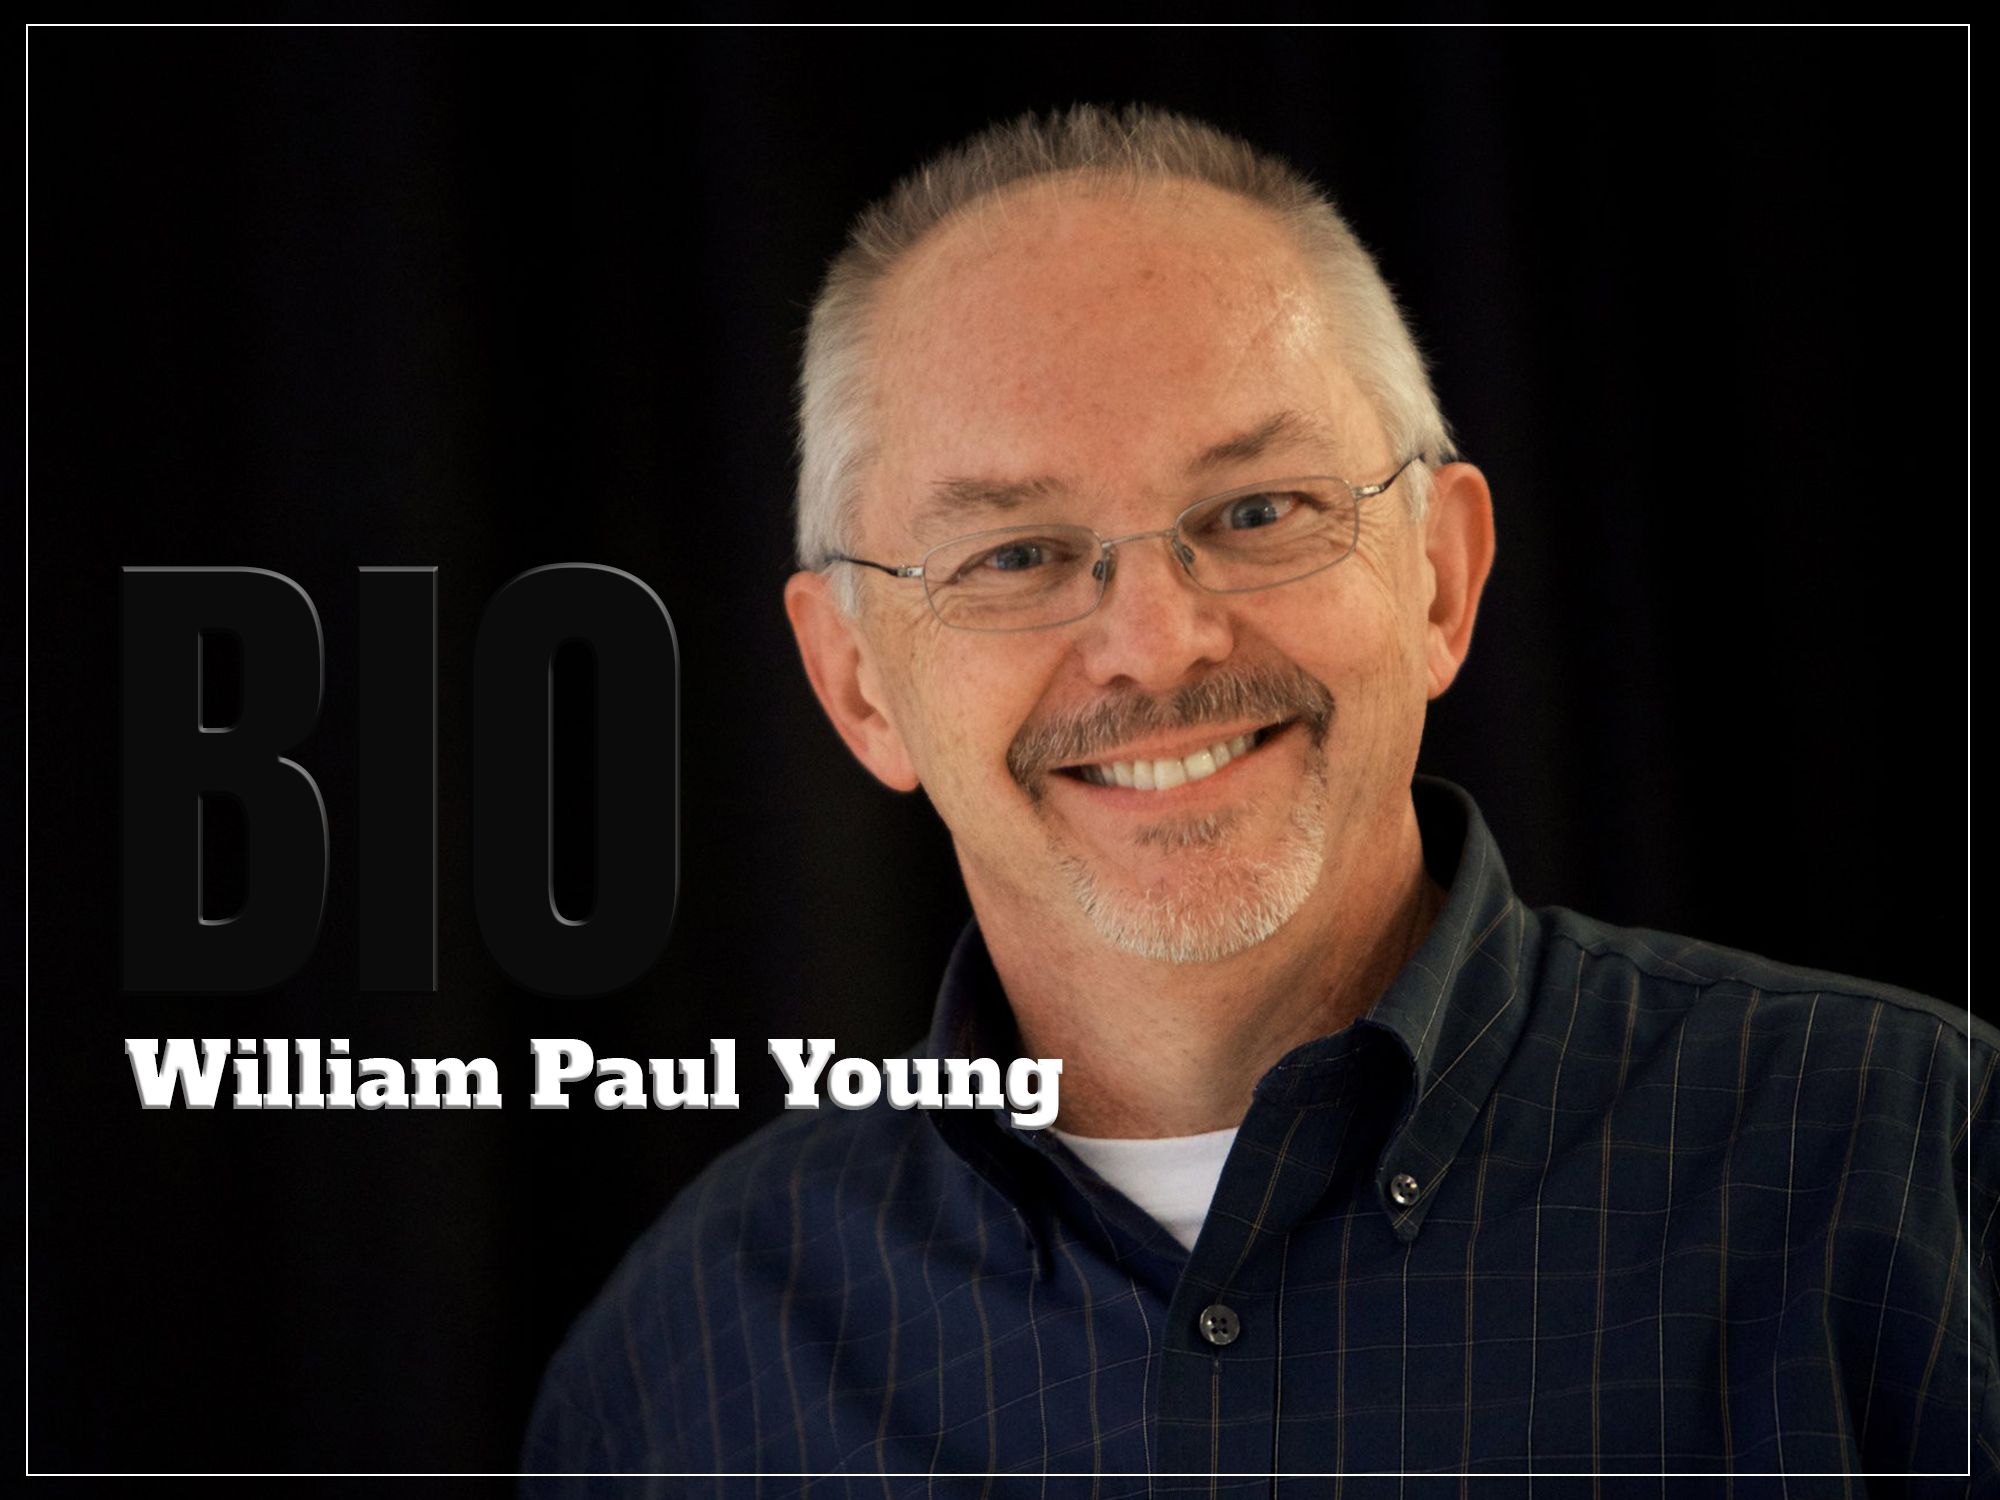 William Paul Young